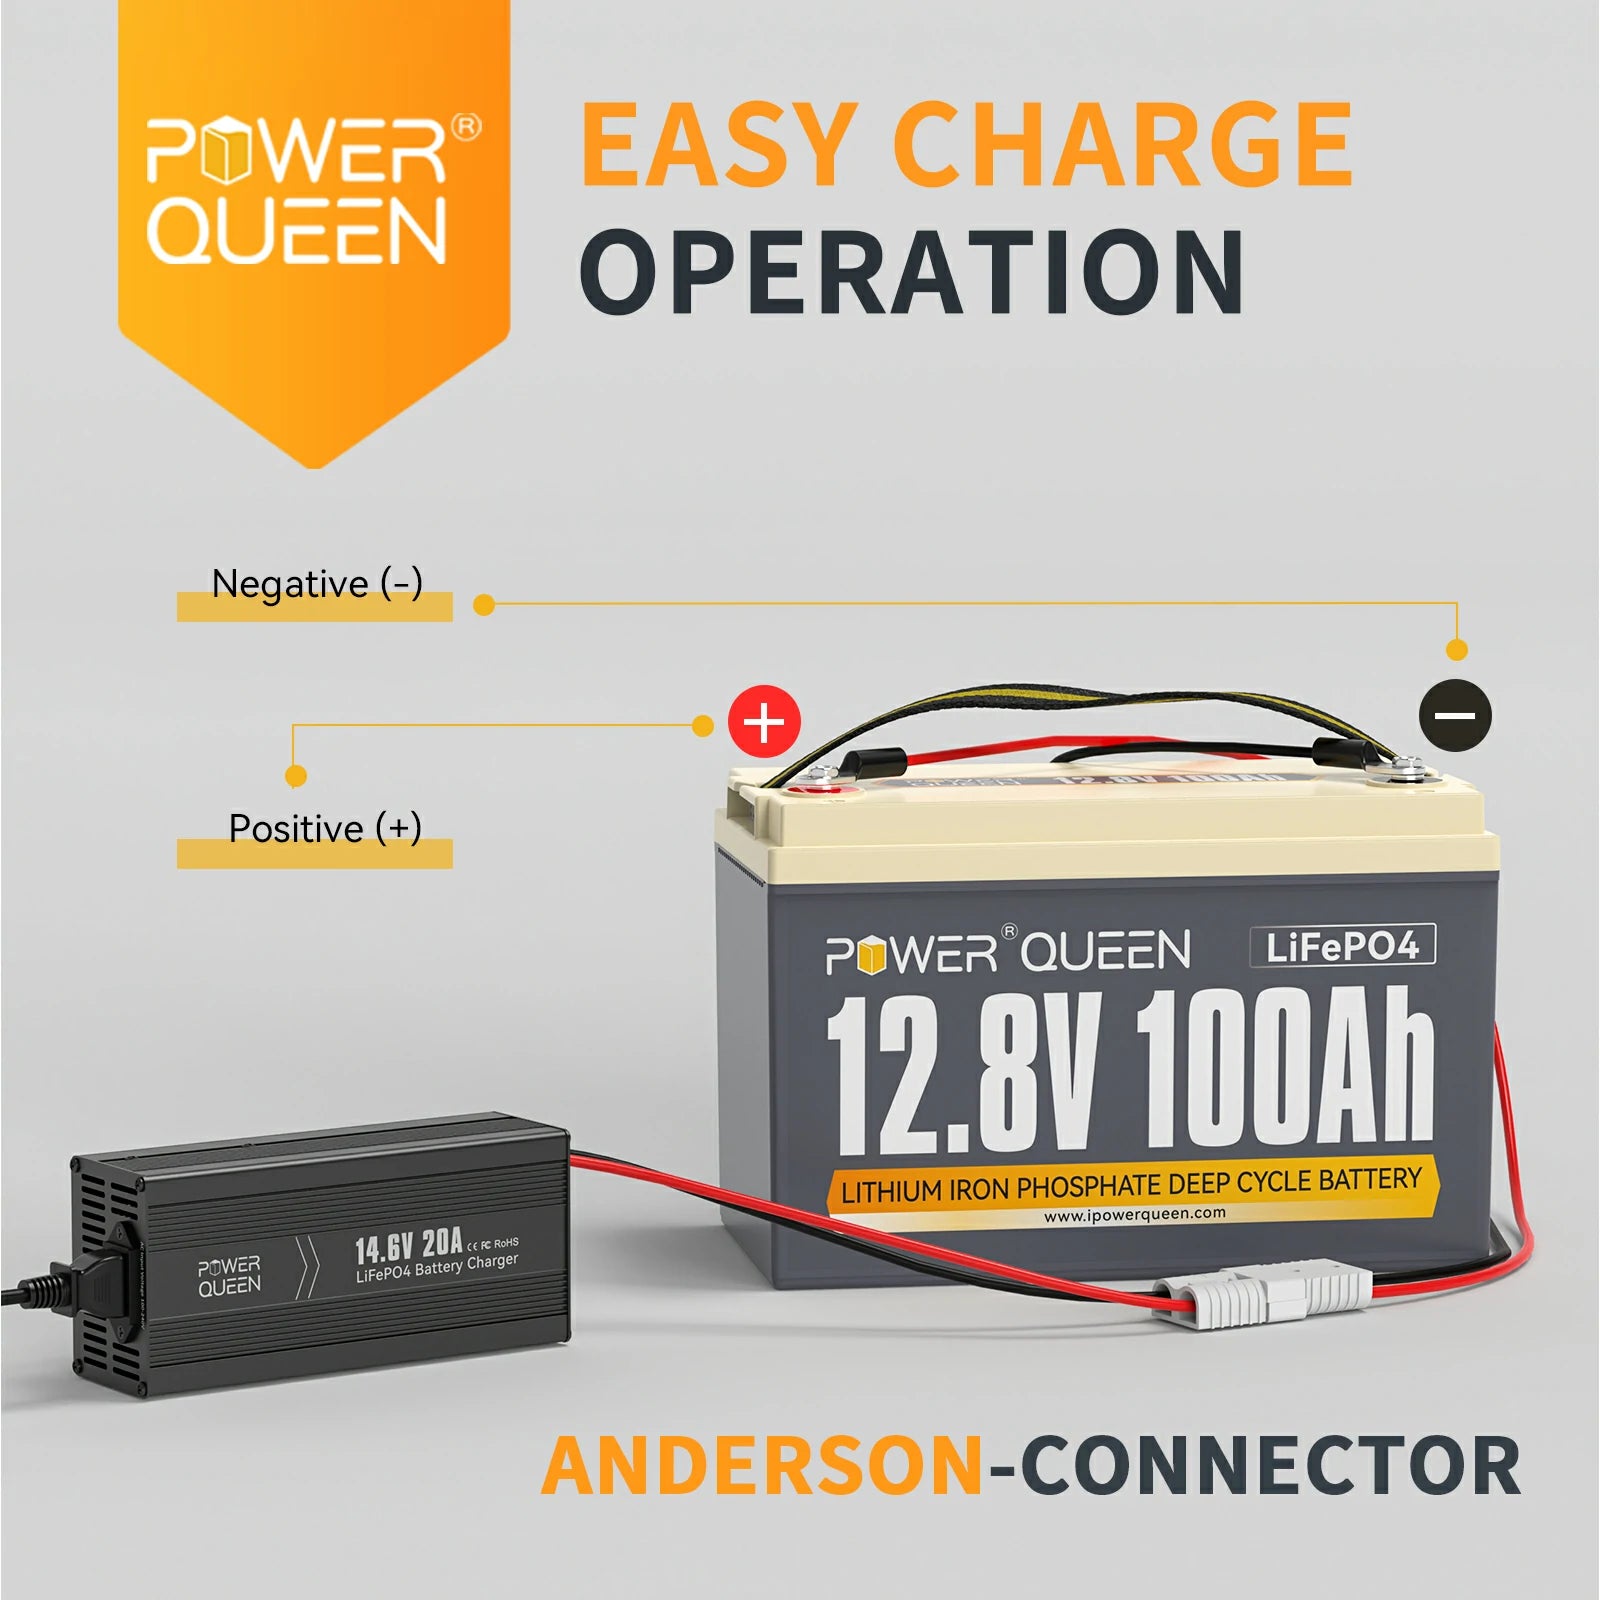 Power-Queen-14.6V-20A-charger-for-lifepo4-battery